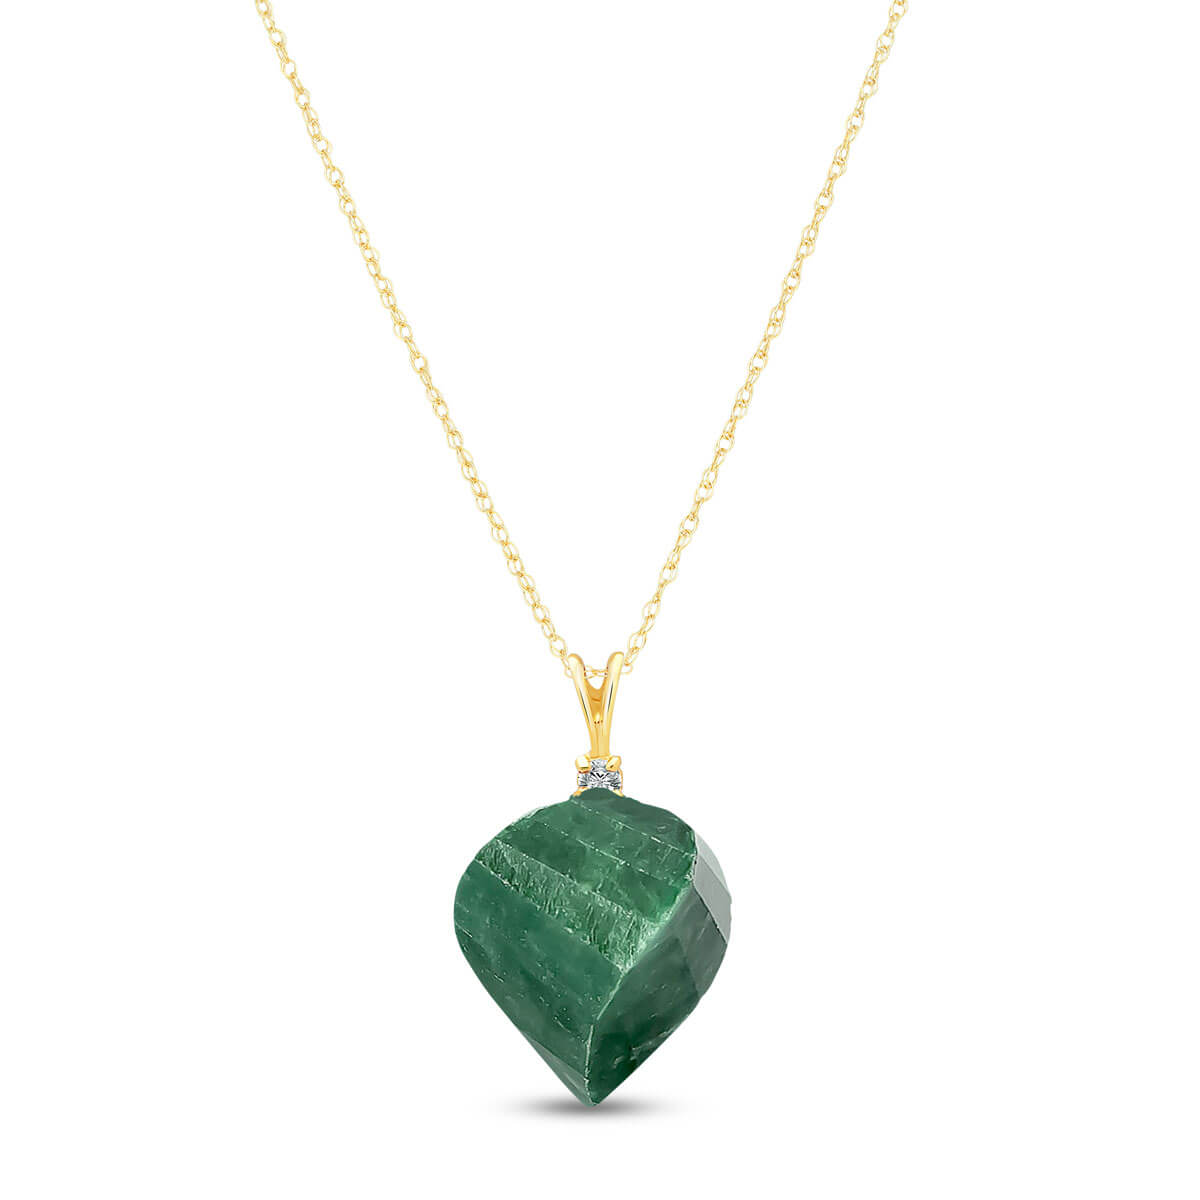 Twisted Briolette Cut Emerald Pendant Necklace 15.3 ctw in 9ct Gold